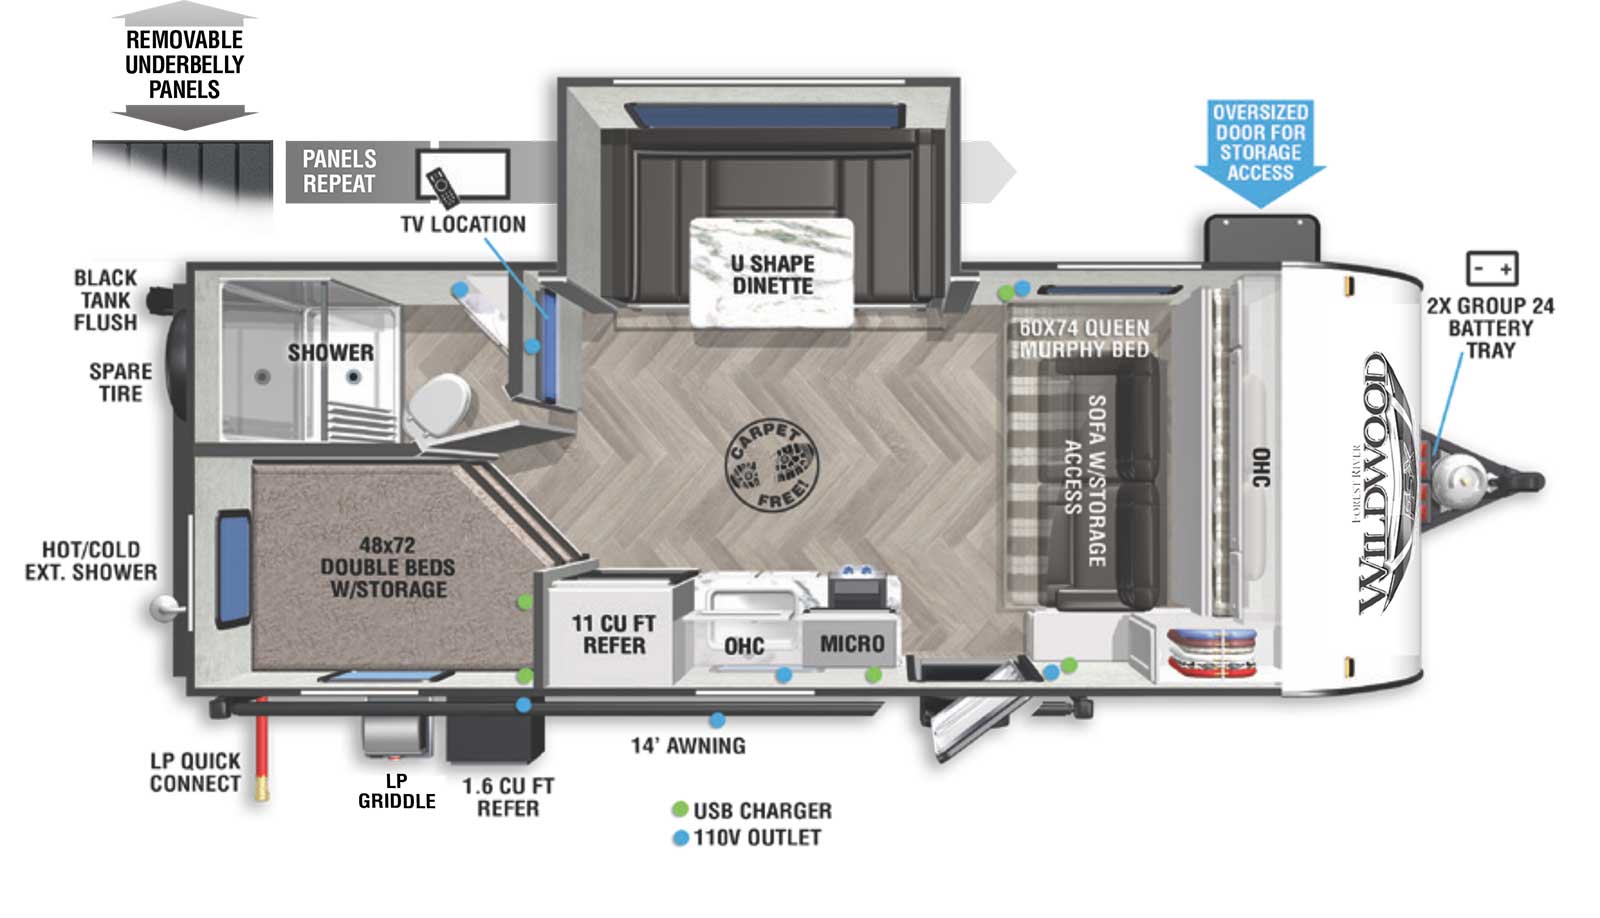 The Wildwood FSX 178BHSK floorplan is great for a small family. The outside sports a 14 foot electric power awning, an LP griddle, and a 1.6 cubic foot refrigerator. The entrance leads right into the living area. In the off-door side slide out is a standard U-shape dinette. On the opposing side, door side, is the kitchen. The kitchen has an 11 cubic foot refrigerator, stove, microwave, and sink with a kitchen window above it. Up front is a 60” by 74” Queen Murphy bed with sofa and storage access beneath. A rear off-door side bathroom includes a walk-in shower, toilet, and sink. In the rear door side are the 48” by 72” double bunk beds with storage beneath.